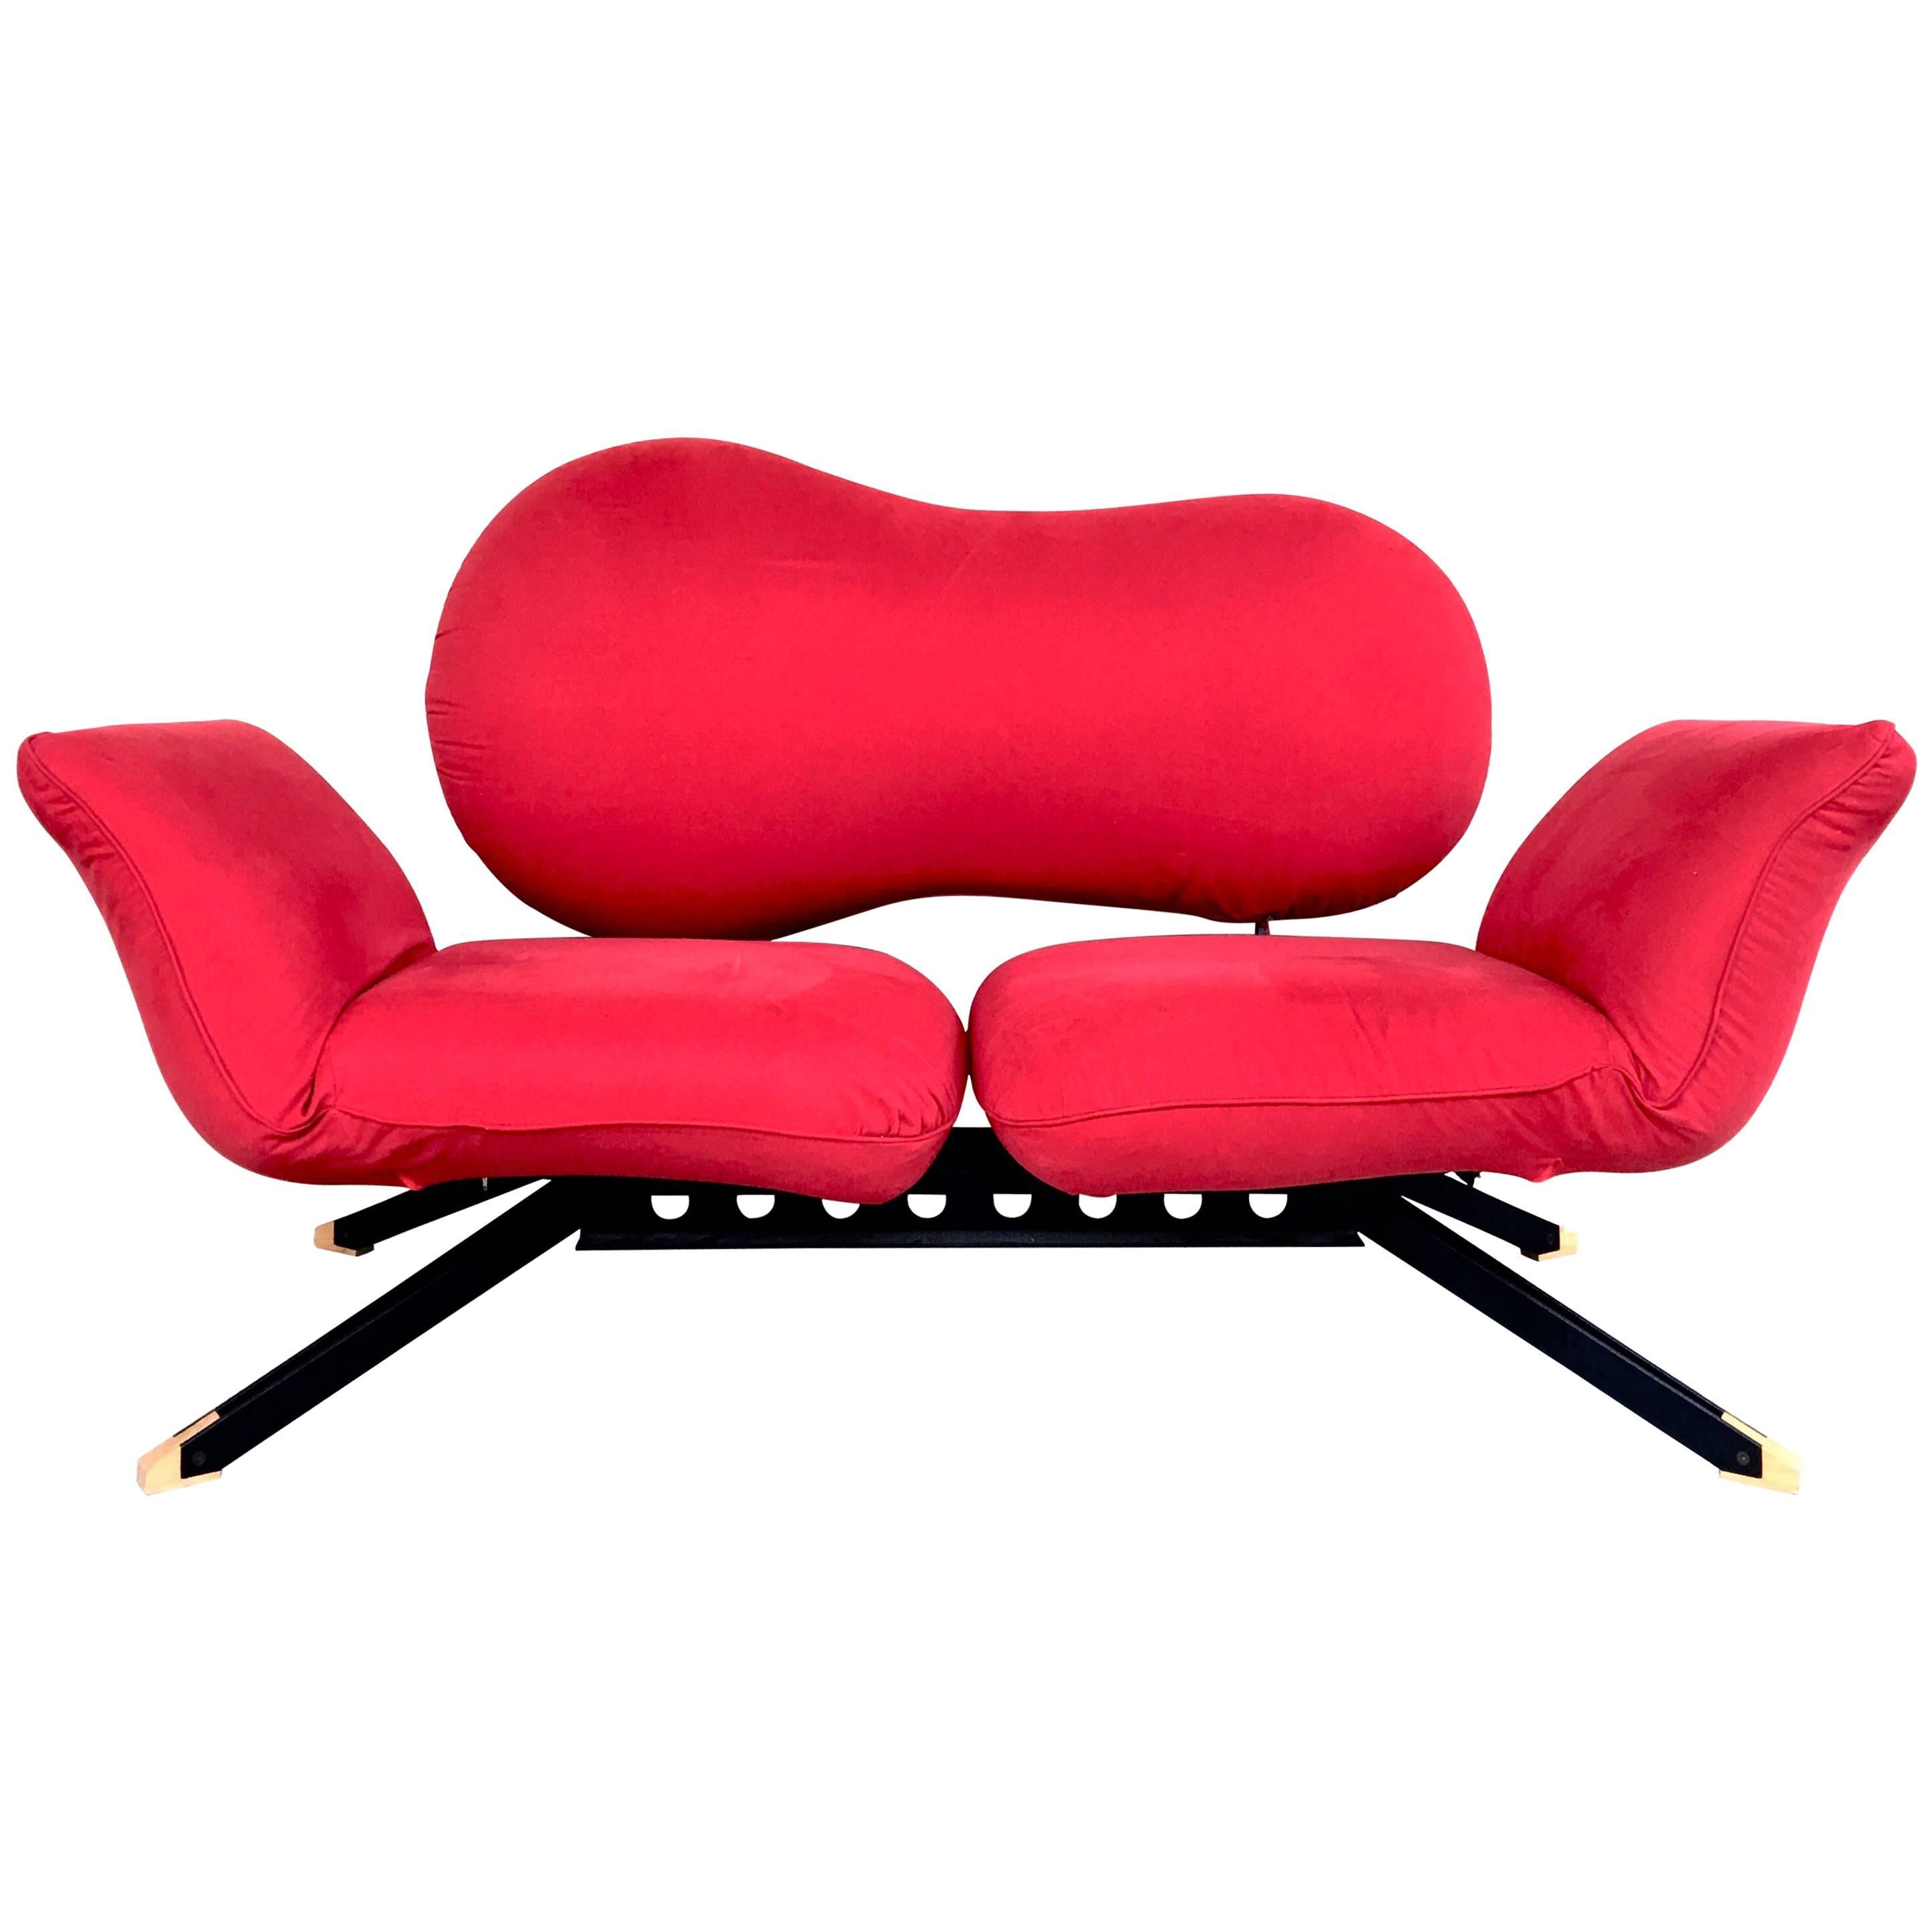 Postmodern Sculptural Red Sofa, Italy For Sale